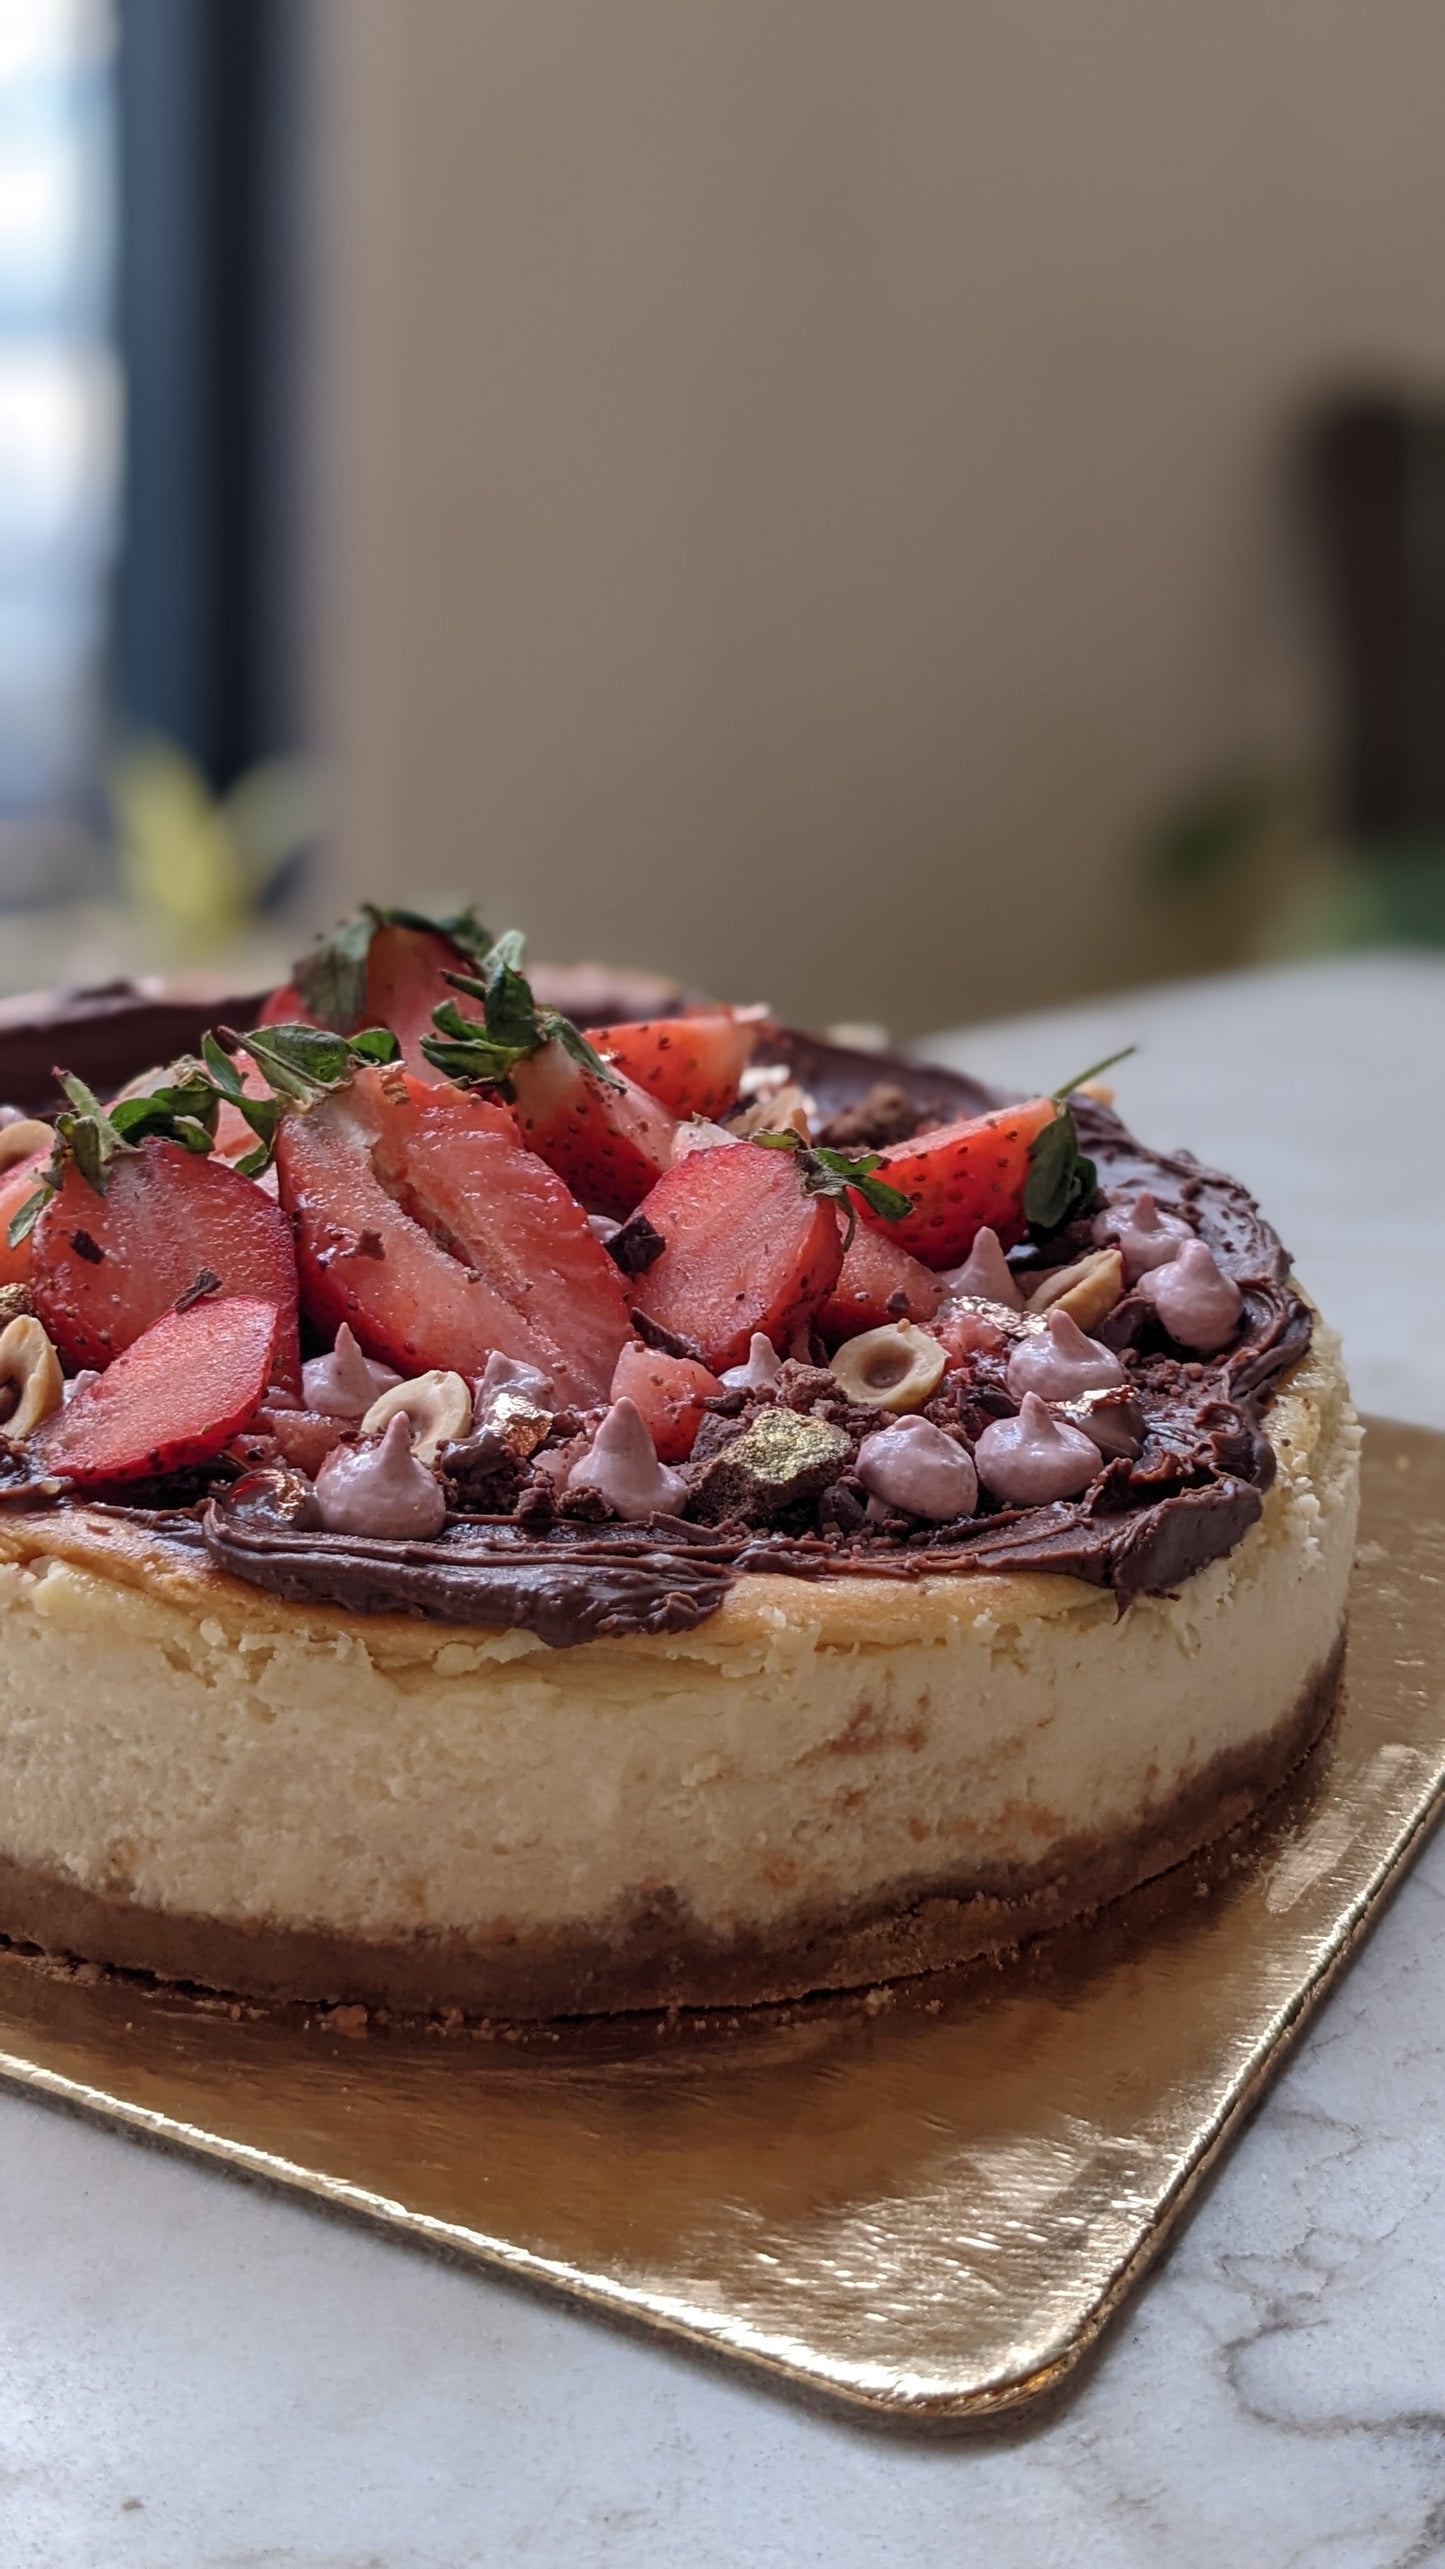 Strawberry, Chocolate and Almond Baked Cheesecake